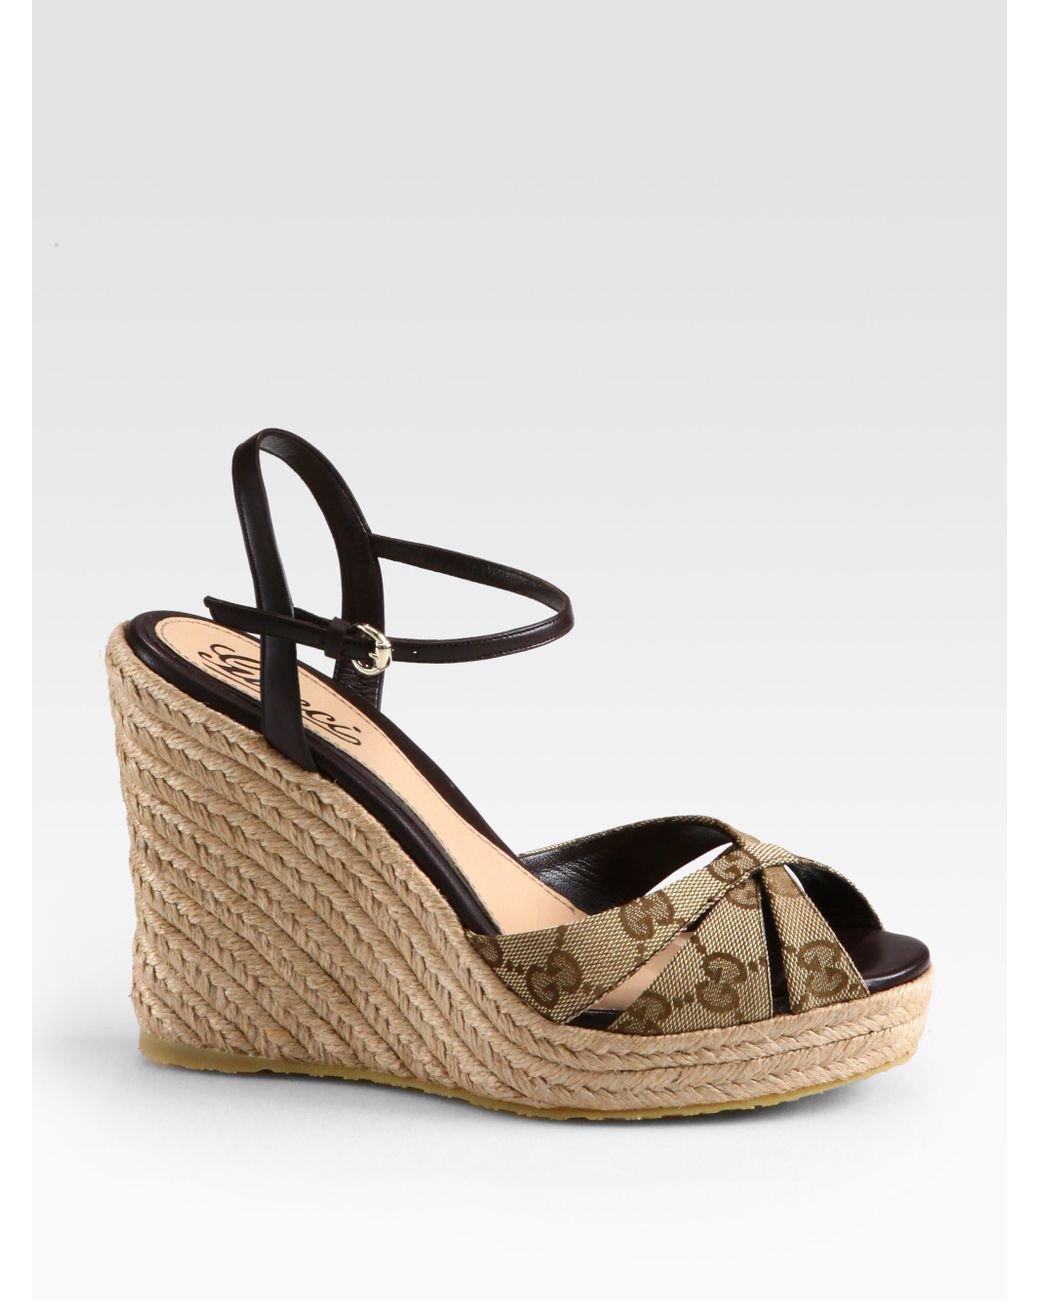 Gucci Penelope Gg Canvas Espadrille Wedges in Black | Lyst